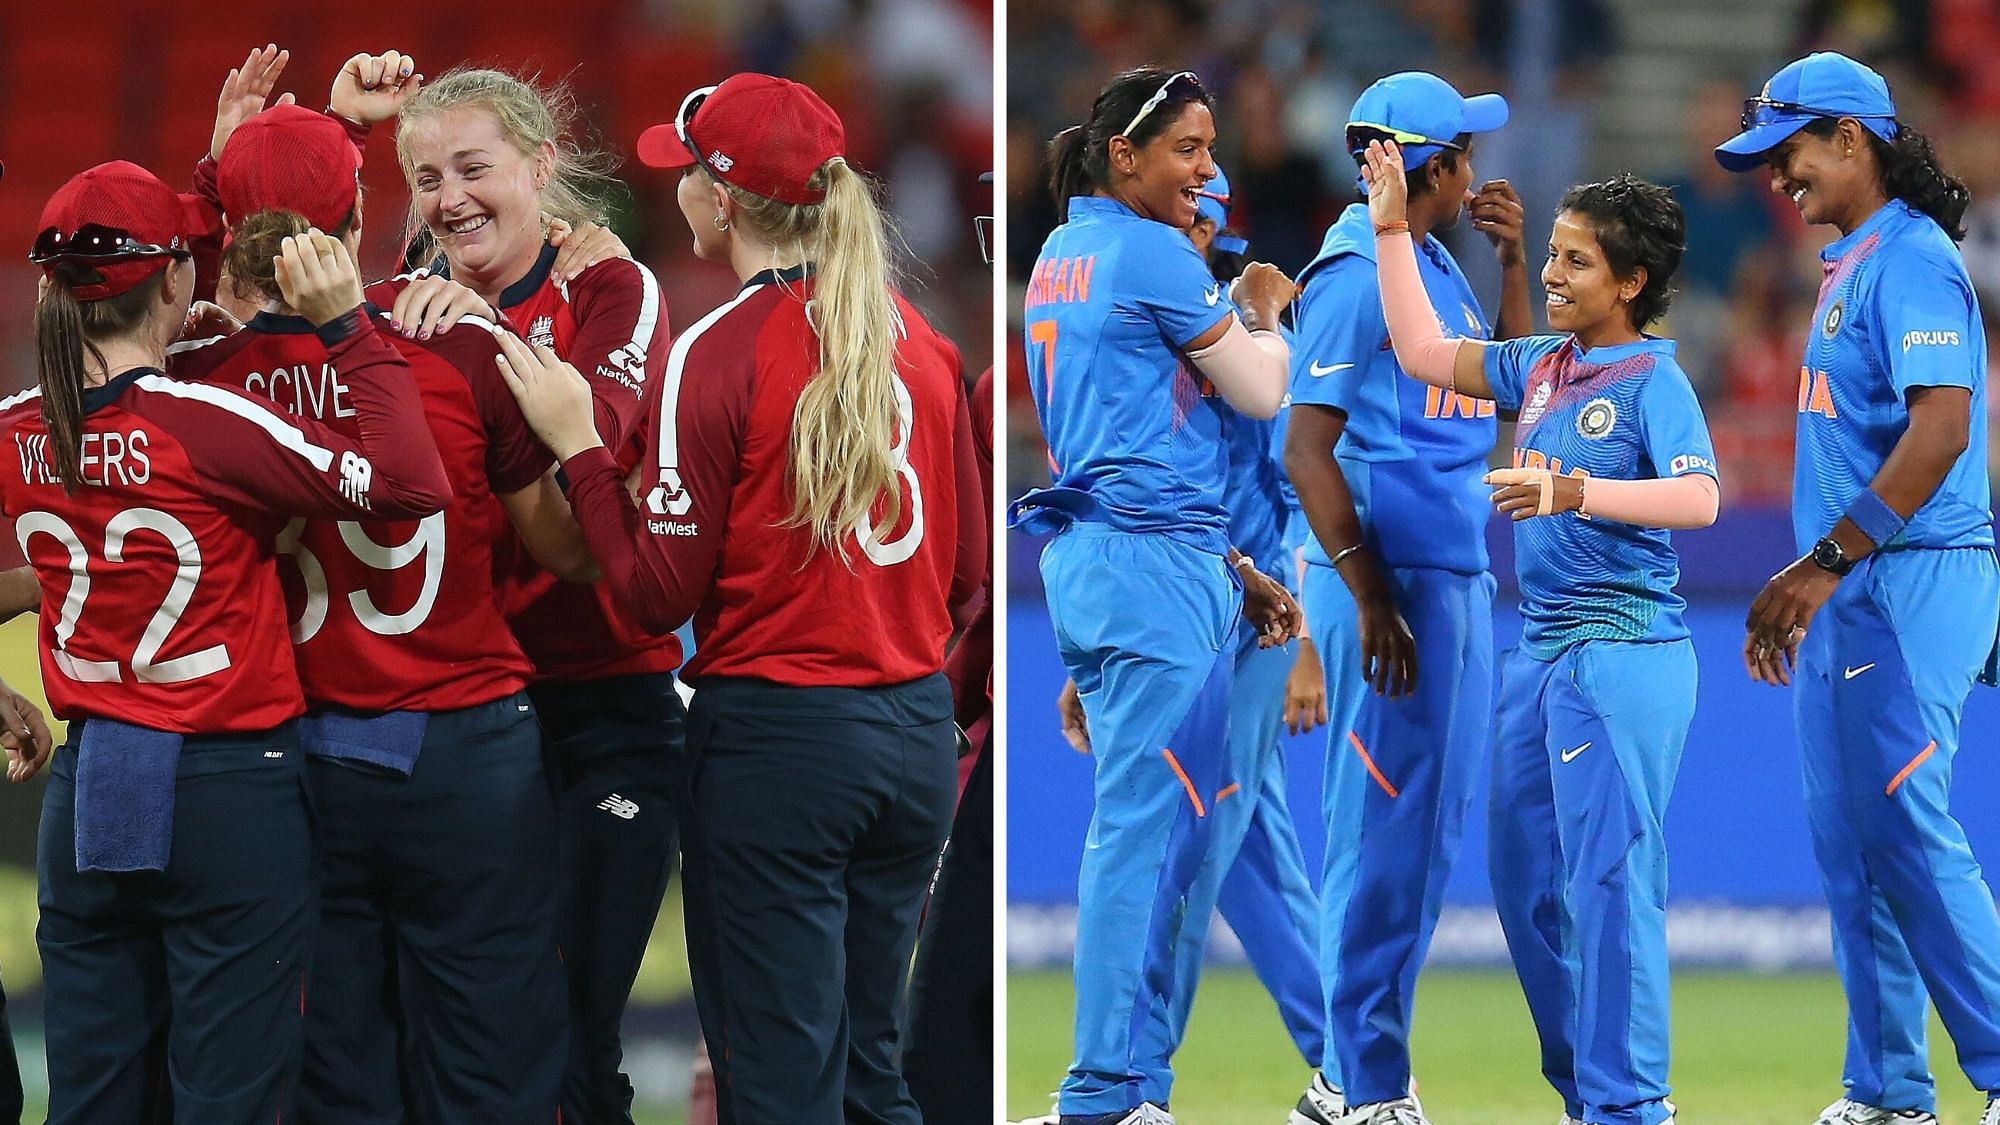 In their last meeting in the Women’s T20 World Cup, England defeated India by 8 wickets in the semi-finals.